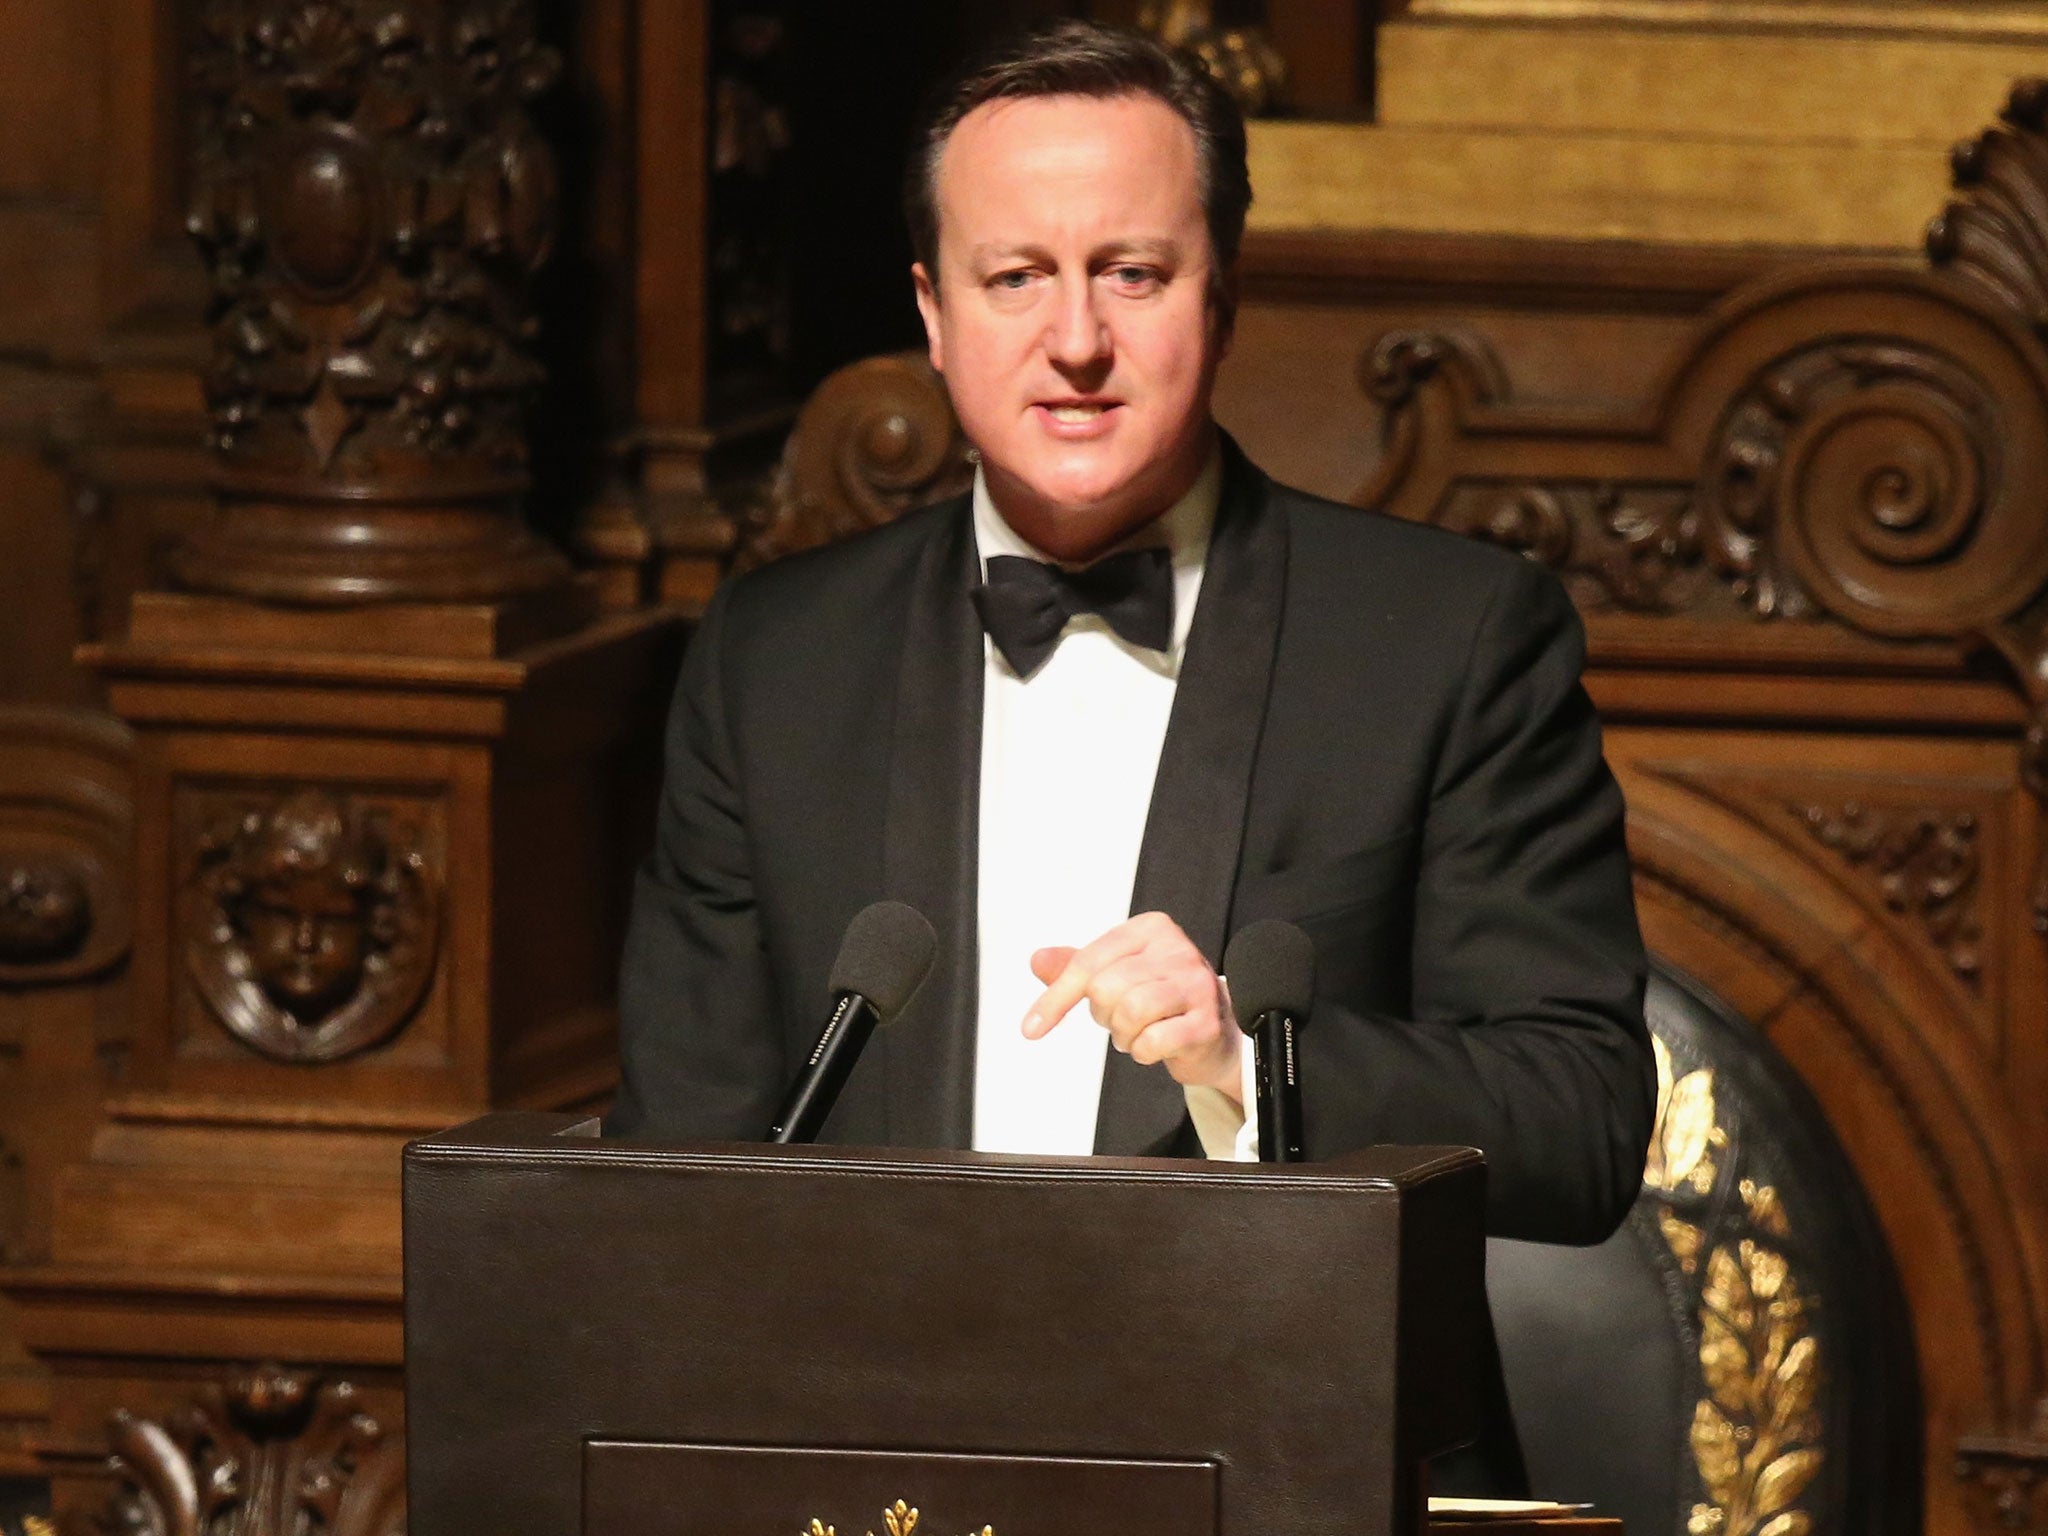 Cameron made his comments in a speech in Hamburg